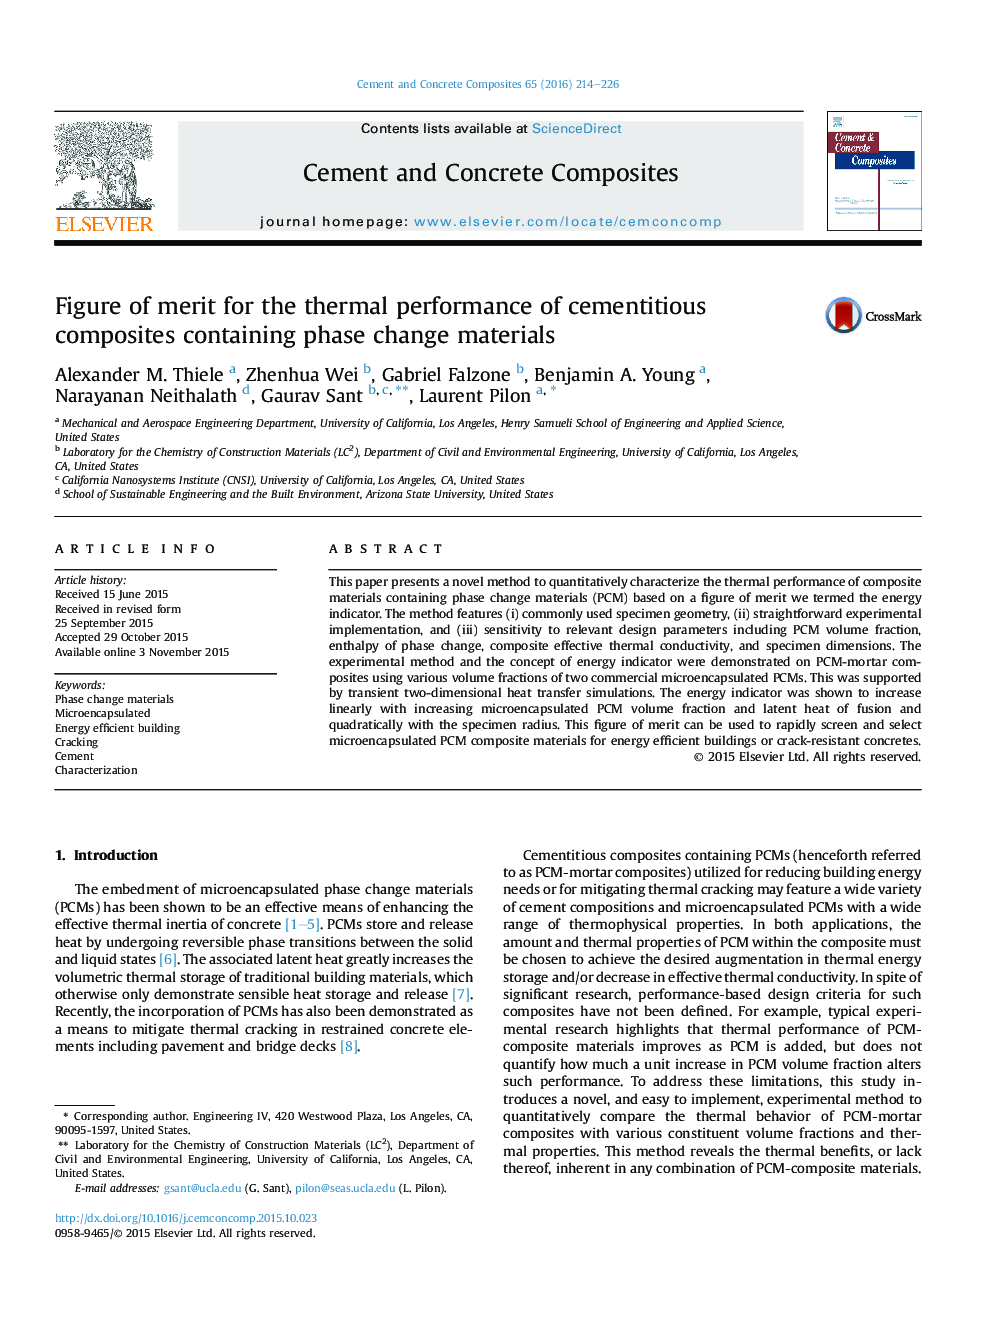 Figure of merit for the thermal performance of cementitious composites containing phase change materials